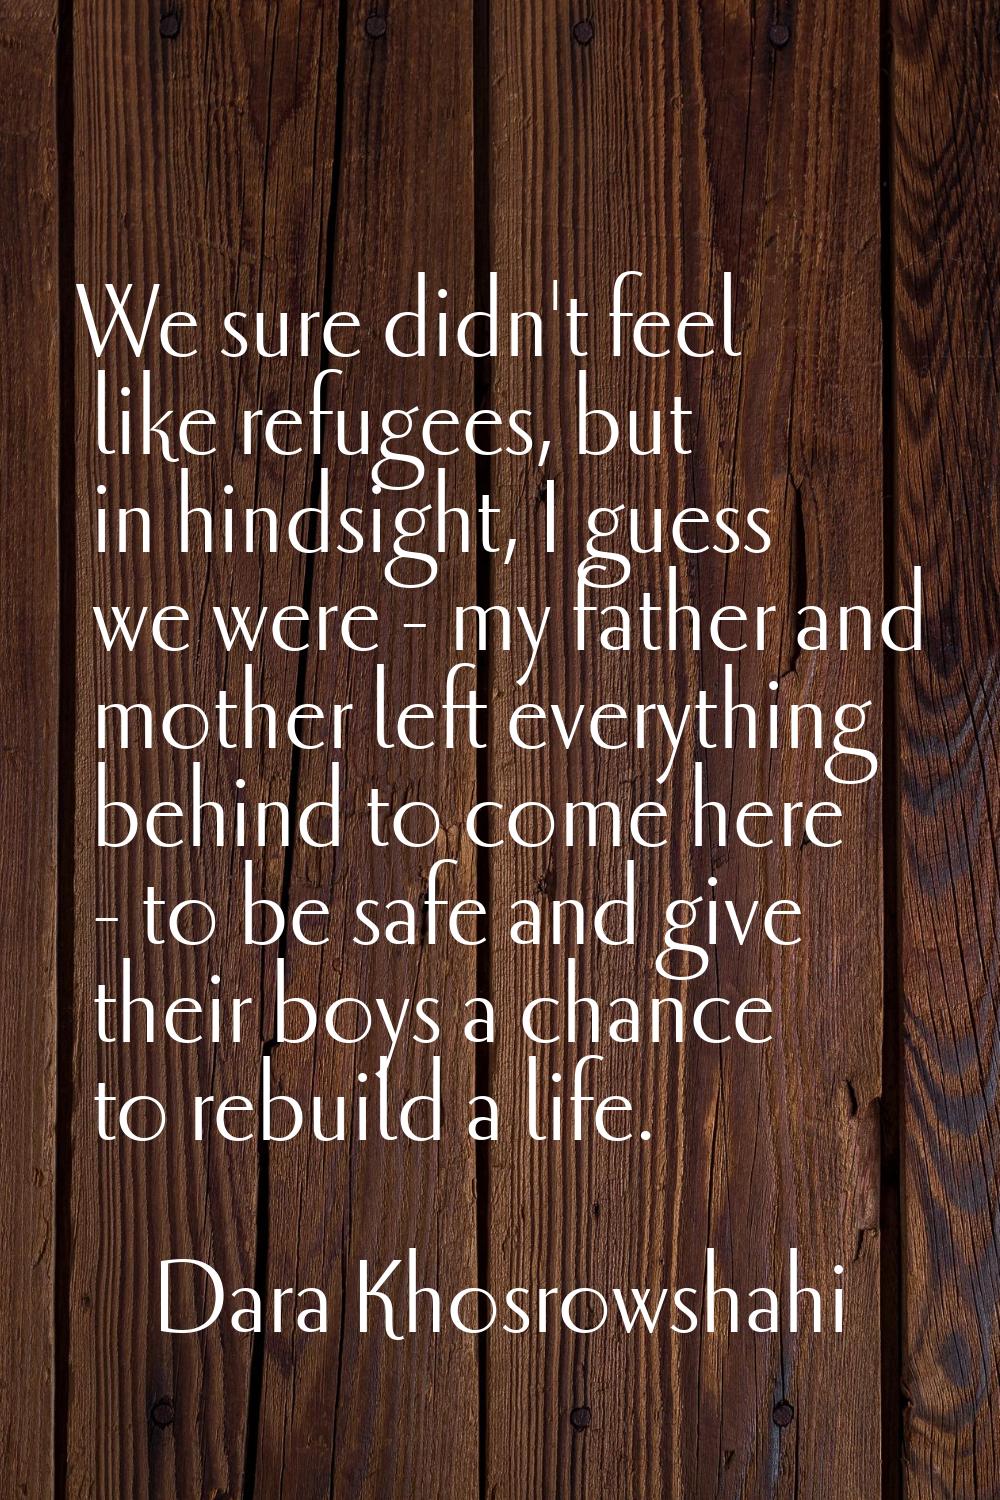 We sure didn't feel like refugees, but in hindsight, I guess we were - my father and mother left ev